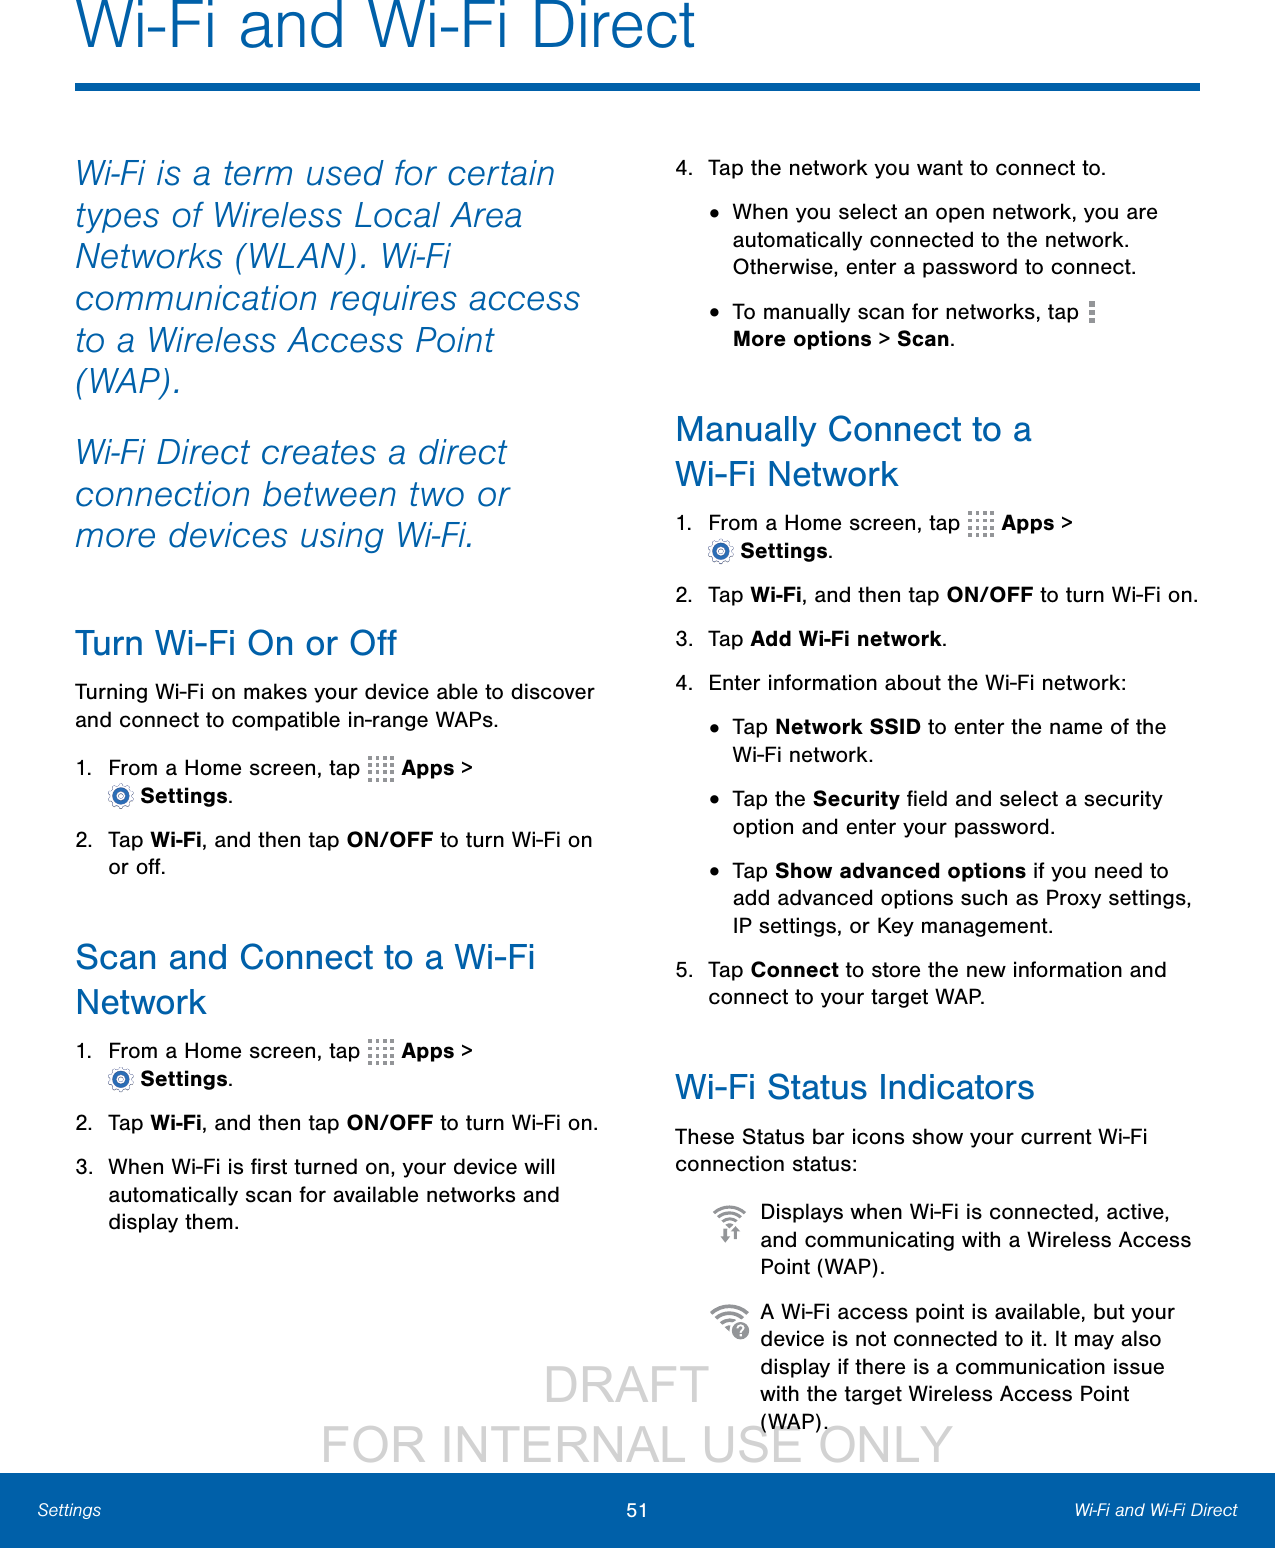                 DRAFT FOR INTERNAL USE ONLY51 Wi-Fi and Wi-Fi DirectSettingsWi-Fi is a term used for certain types of Wireless Local Area Networks (WLAN). Wi-Fi communication requires access to a Wireless Access Point (WAP).Wi-Fi Direct creates a direct connection between two or more devices using Wi-Fi. Turn Wi- Fi On or OﬀTurning Wi-Fi on makes your device able to discover and connect to compatible in-range WAPs.1.  From a Home screen, tap   Apps &gt; Settings.2.  Tap Wi-Fi, and then tap ON/OFF to turn Wi-Fi on or oﬀ.Scan and Connect to a Wi-Fi Network1.  From a Home screen, tap   Apps &gt; Settings.2.  Tap Wi-Fi, and then tap ON/OFF to turn Wi-Fi on.3.  When Wi-Fi is ﬁrst turned on, your device will automatically scan for available networks and display them.4.  Tap the network you want to connect to.•  When you select an open network, you are automatically connected to the network. Otherwise, enter a password to connect.•  To manually scan for networks, tap   Moreoptions &gt; Scan.Manually Connect to a Wi-FiNetwork1.  From a Home screen, tap   Apps &gt; Settings.2.  Tap Wi-Fi, and then tap ON/OFF to turn Wi-Fi on.3.  Tap Add Wi-Fi network.4.  Enter information about the Wi-Fi network:•  Tap Network SSID to enter the name of the Wi-Fi network.•  Tap the Security ﬁeld and select a security option and enter your password.•  Tap Show advanced options if you need to add advanced options such as Proxy settings, IPsettings, or Key management.5.  Tap Connect to store the new information and connect to your target WAP.Wi-Fi Status IndicatorsThese Status bar icons show your current Wi-Fi connection status:  Displays when Wi-Fi is connected, active, and communicating with a Wireless Access Point (WAP).  A Wi-Fi access point is available, but your device is not connected to it. It may also display if there is a communication issue with the target Wireless Access Point (WAP).Wi-Fi and Wi-Fi Direct